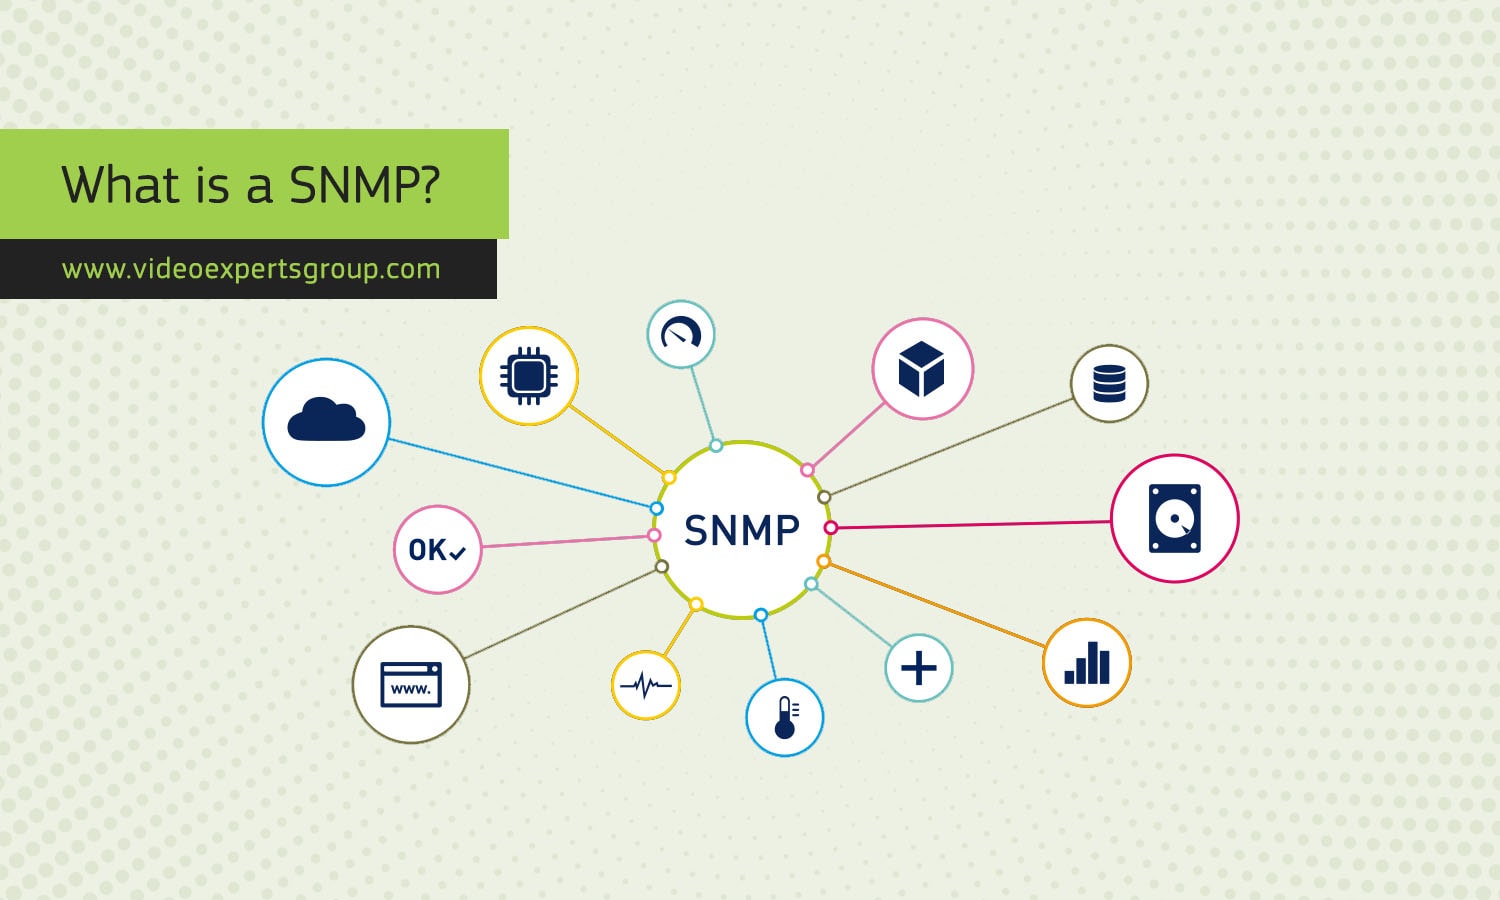 What is a SNMP?